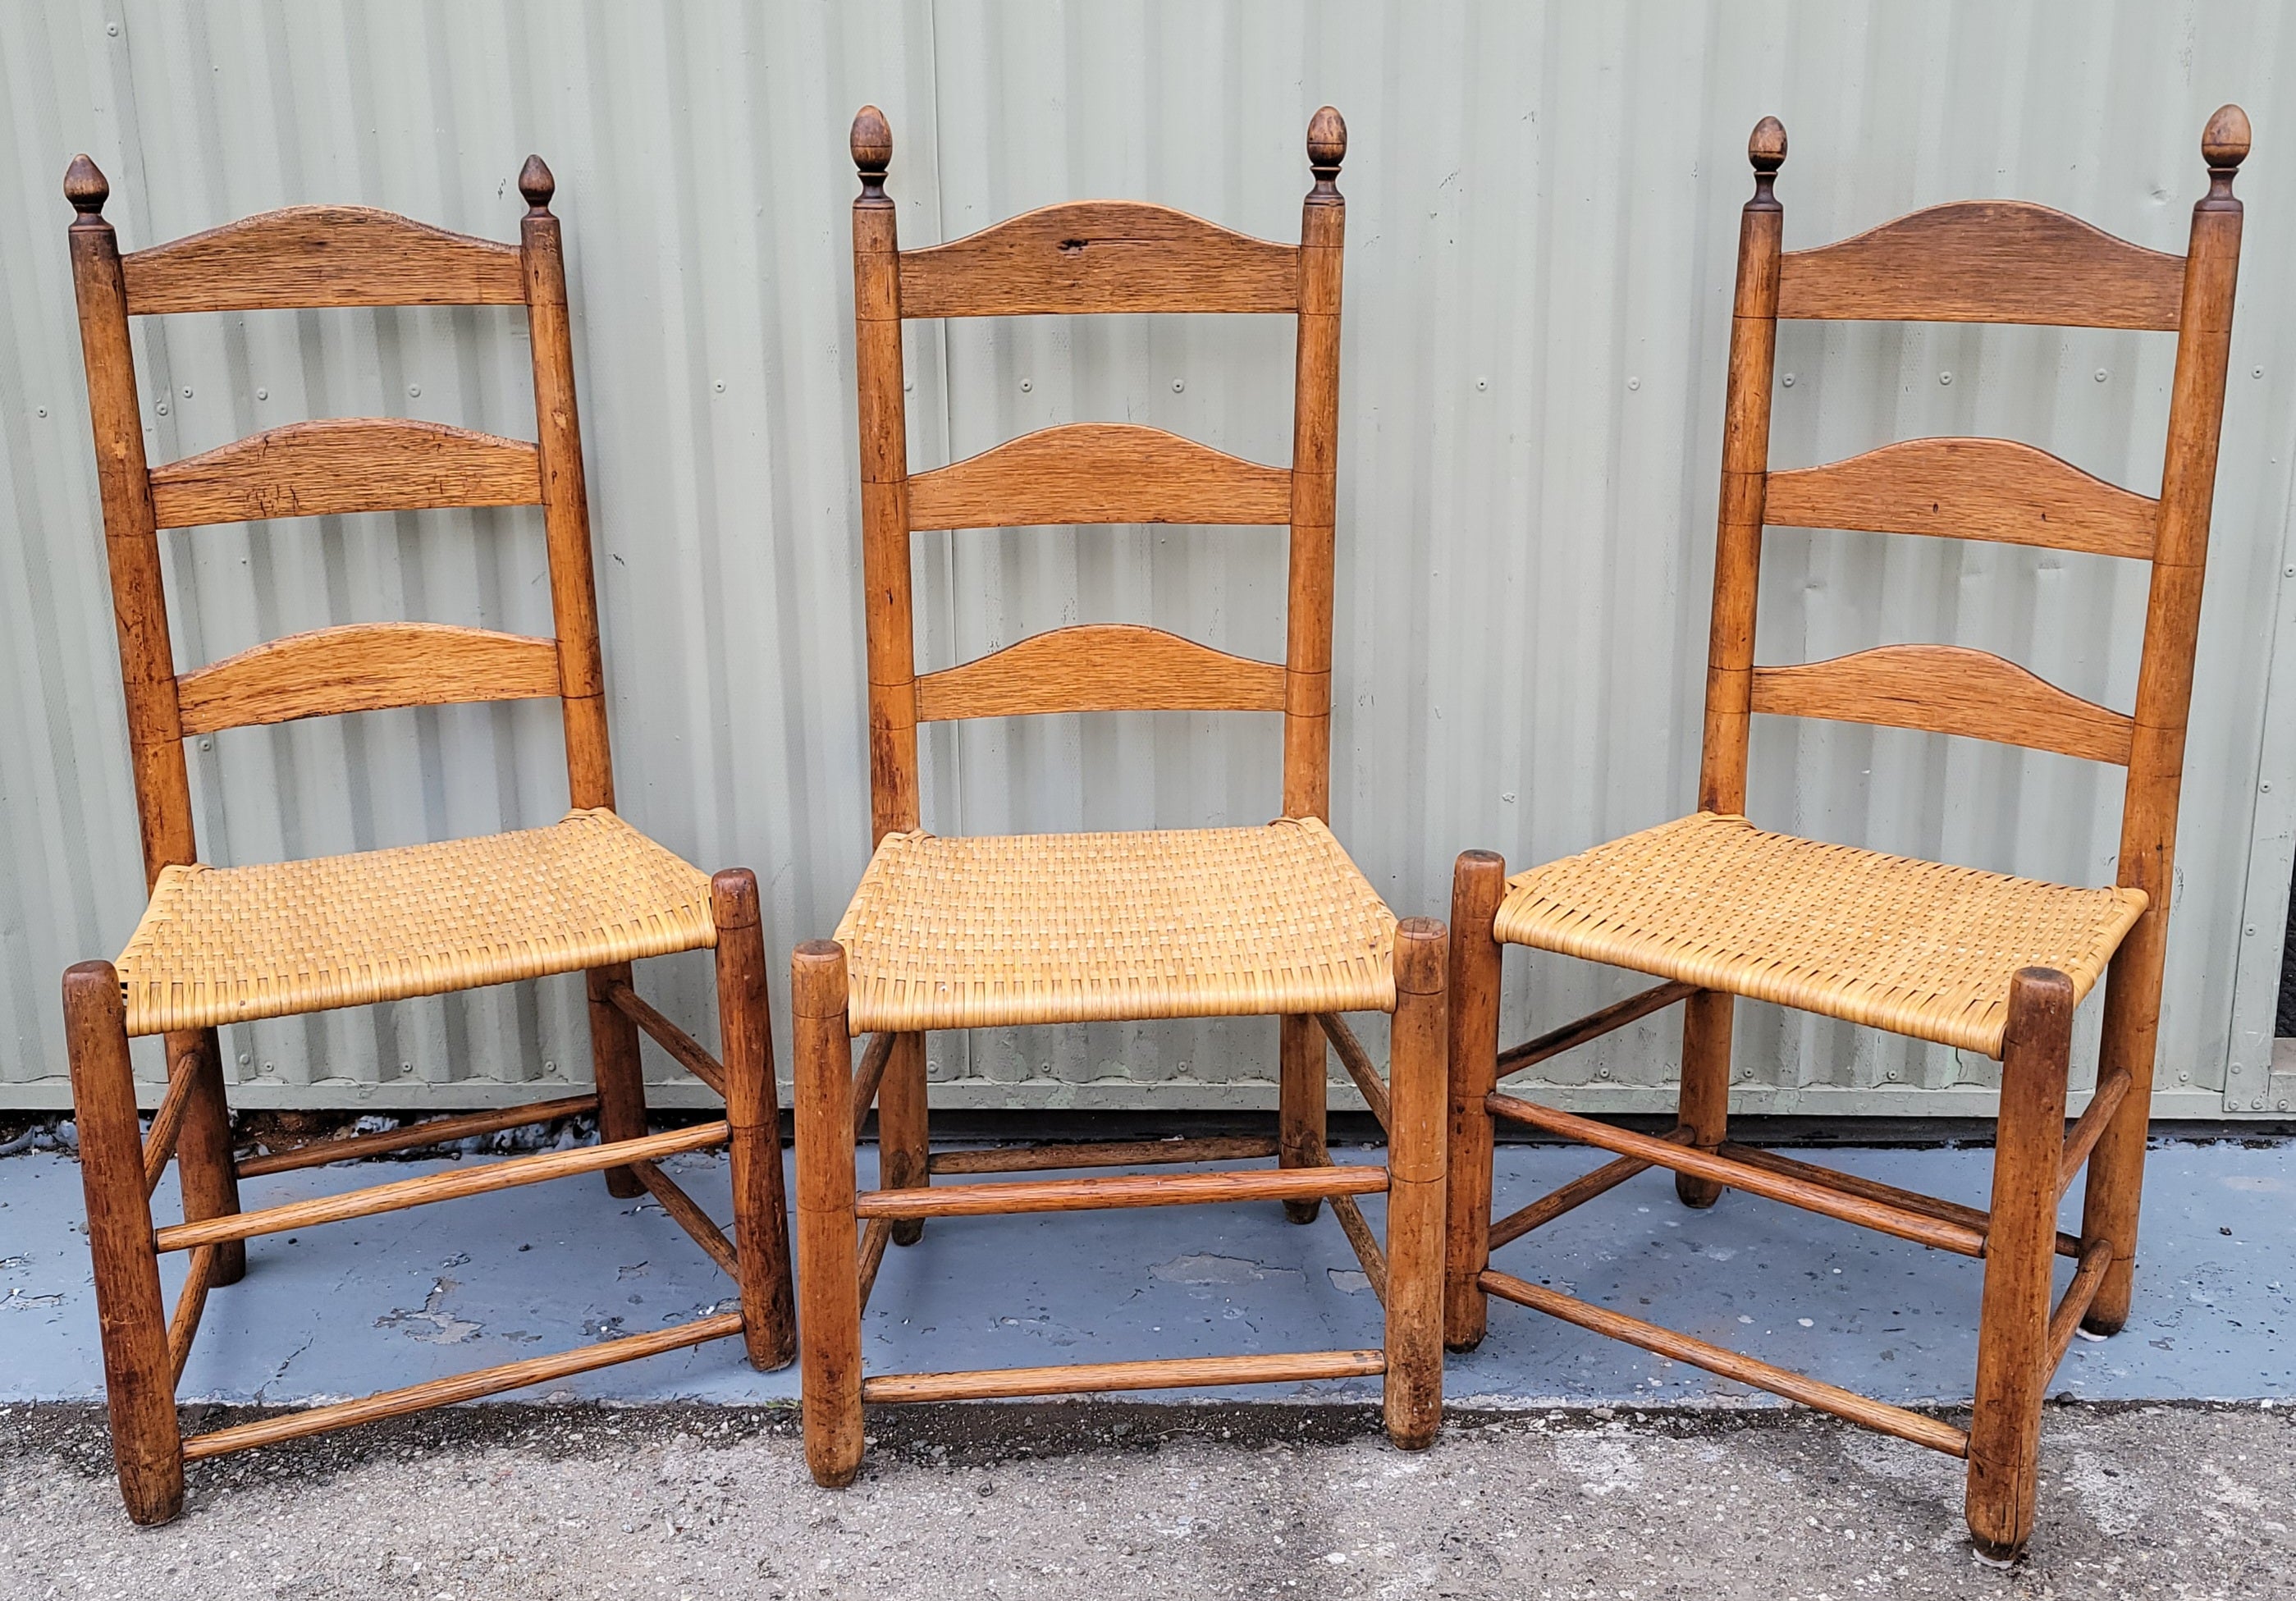 19thc Ladder Back Chairs From Pennsylvania -Set of Three